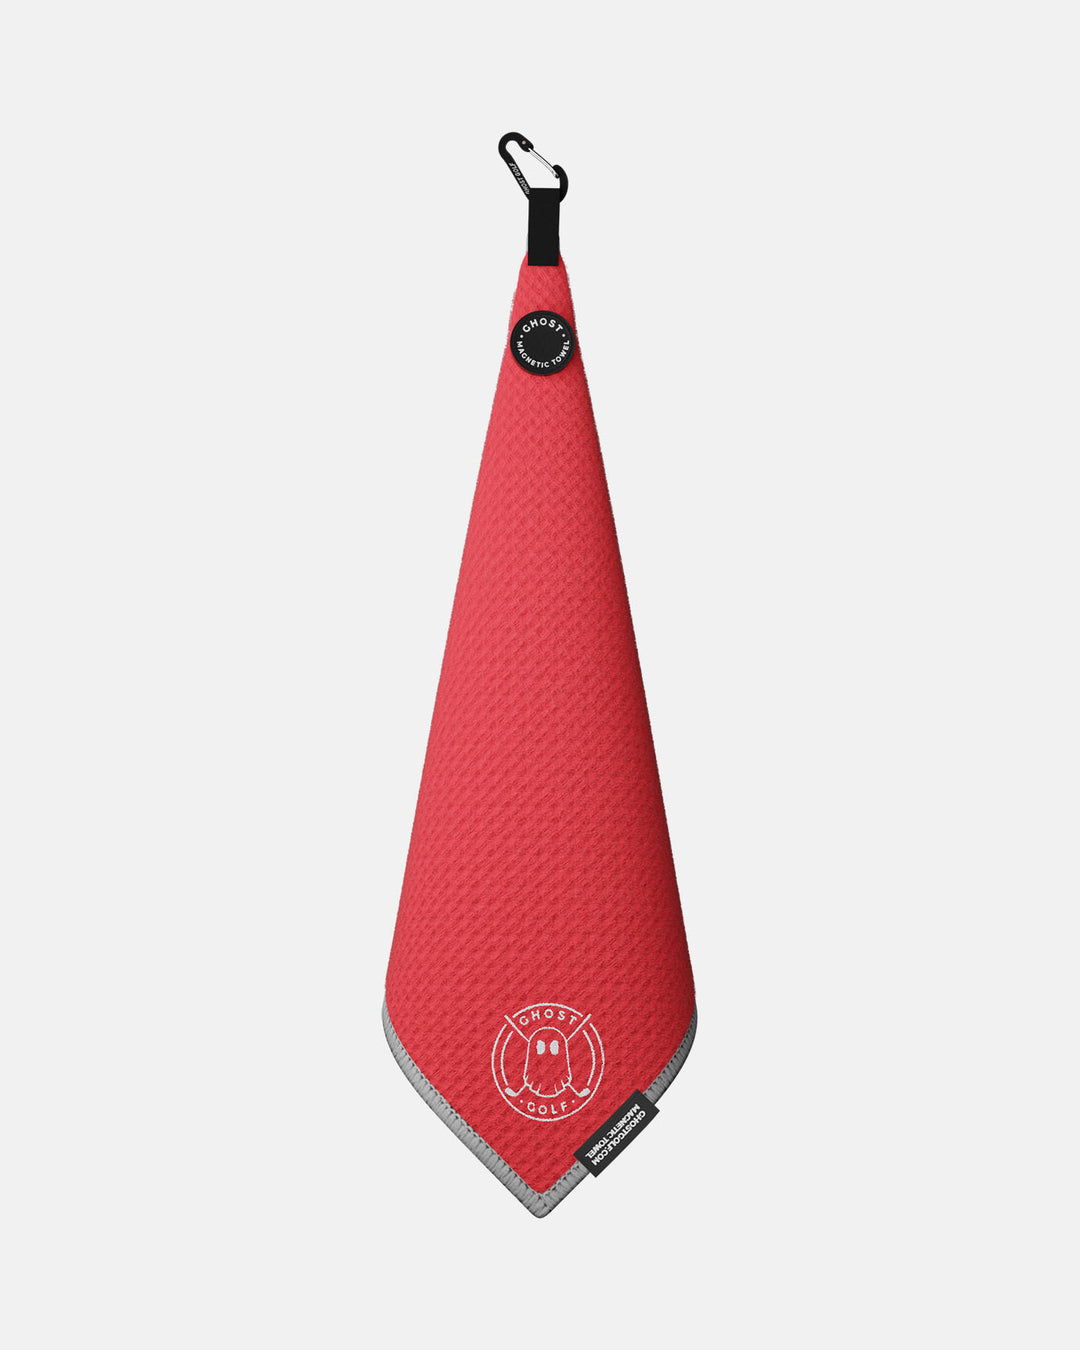 Greenside Towel with Magnet Patch and Carabiner. Red.